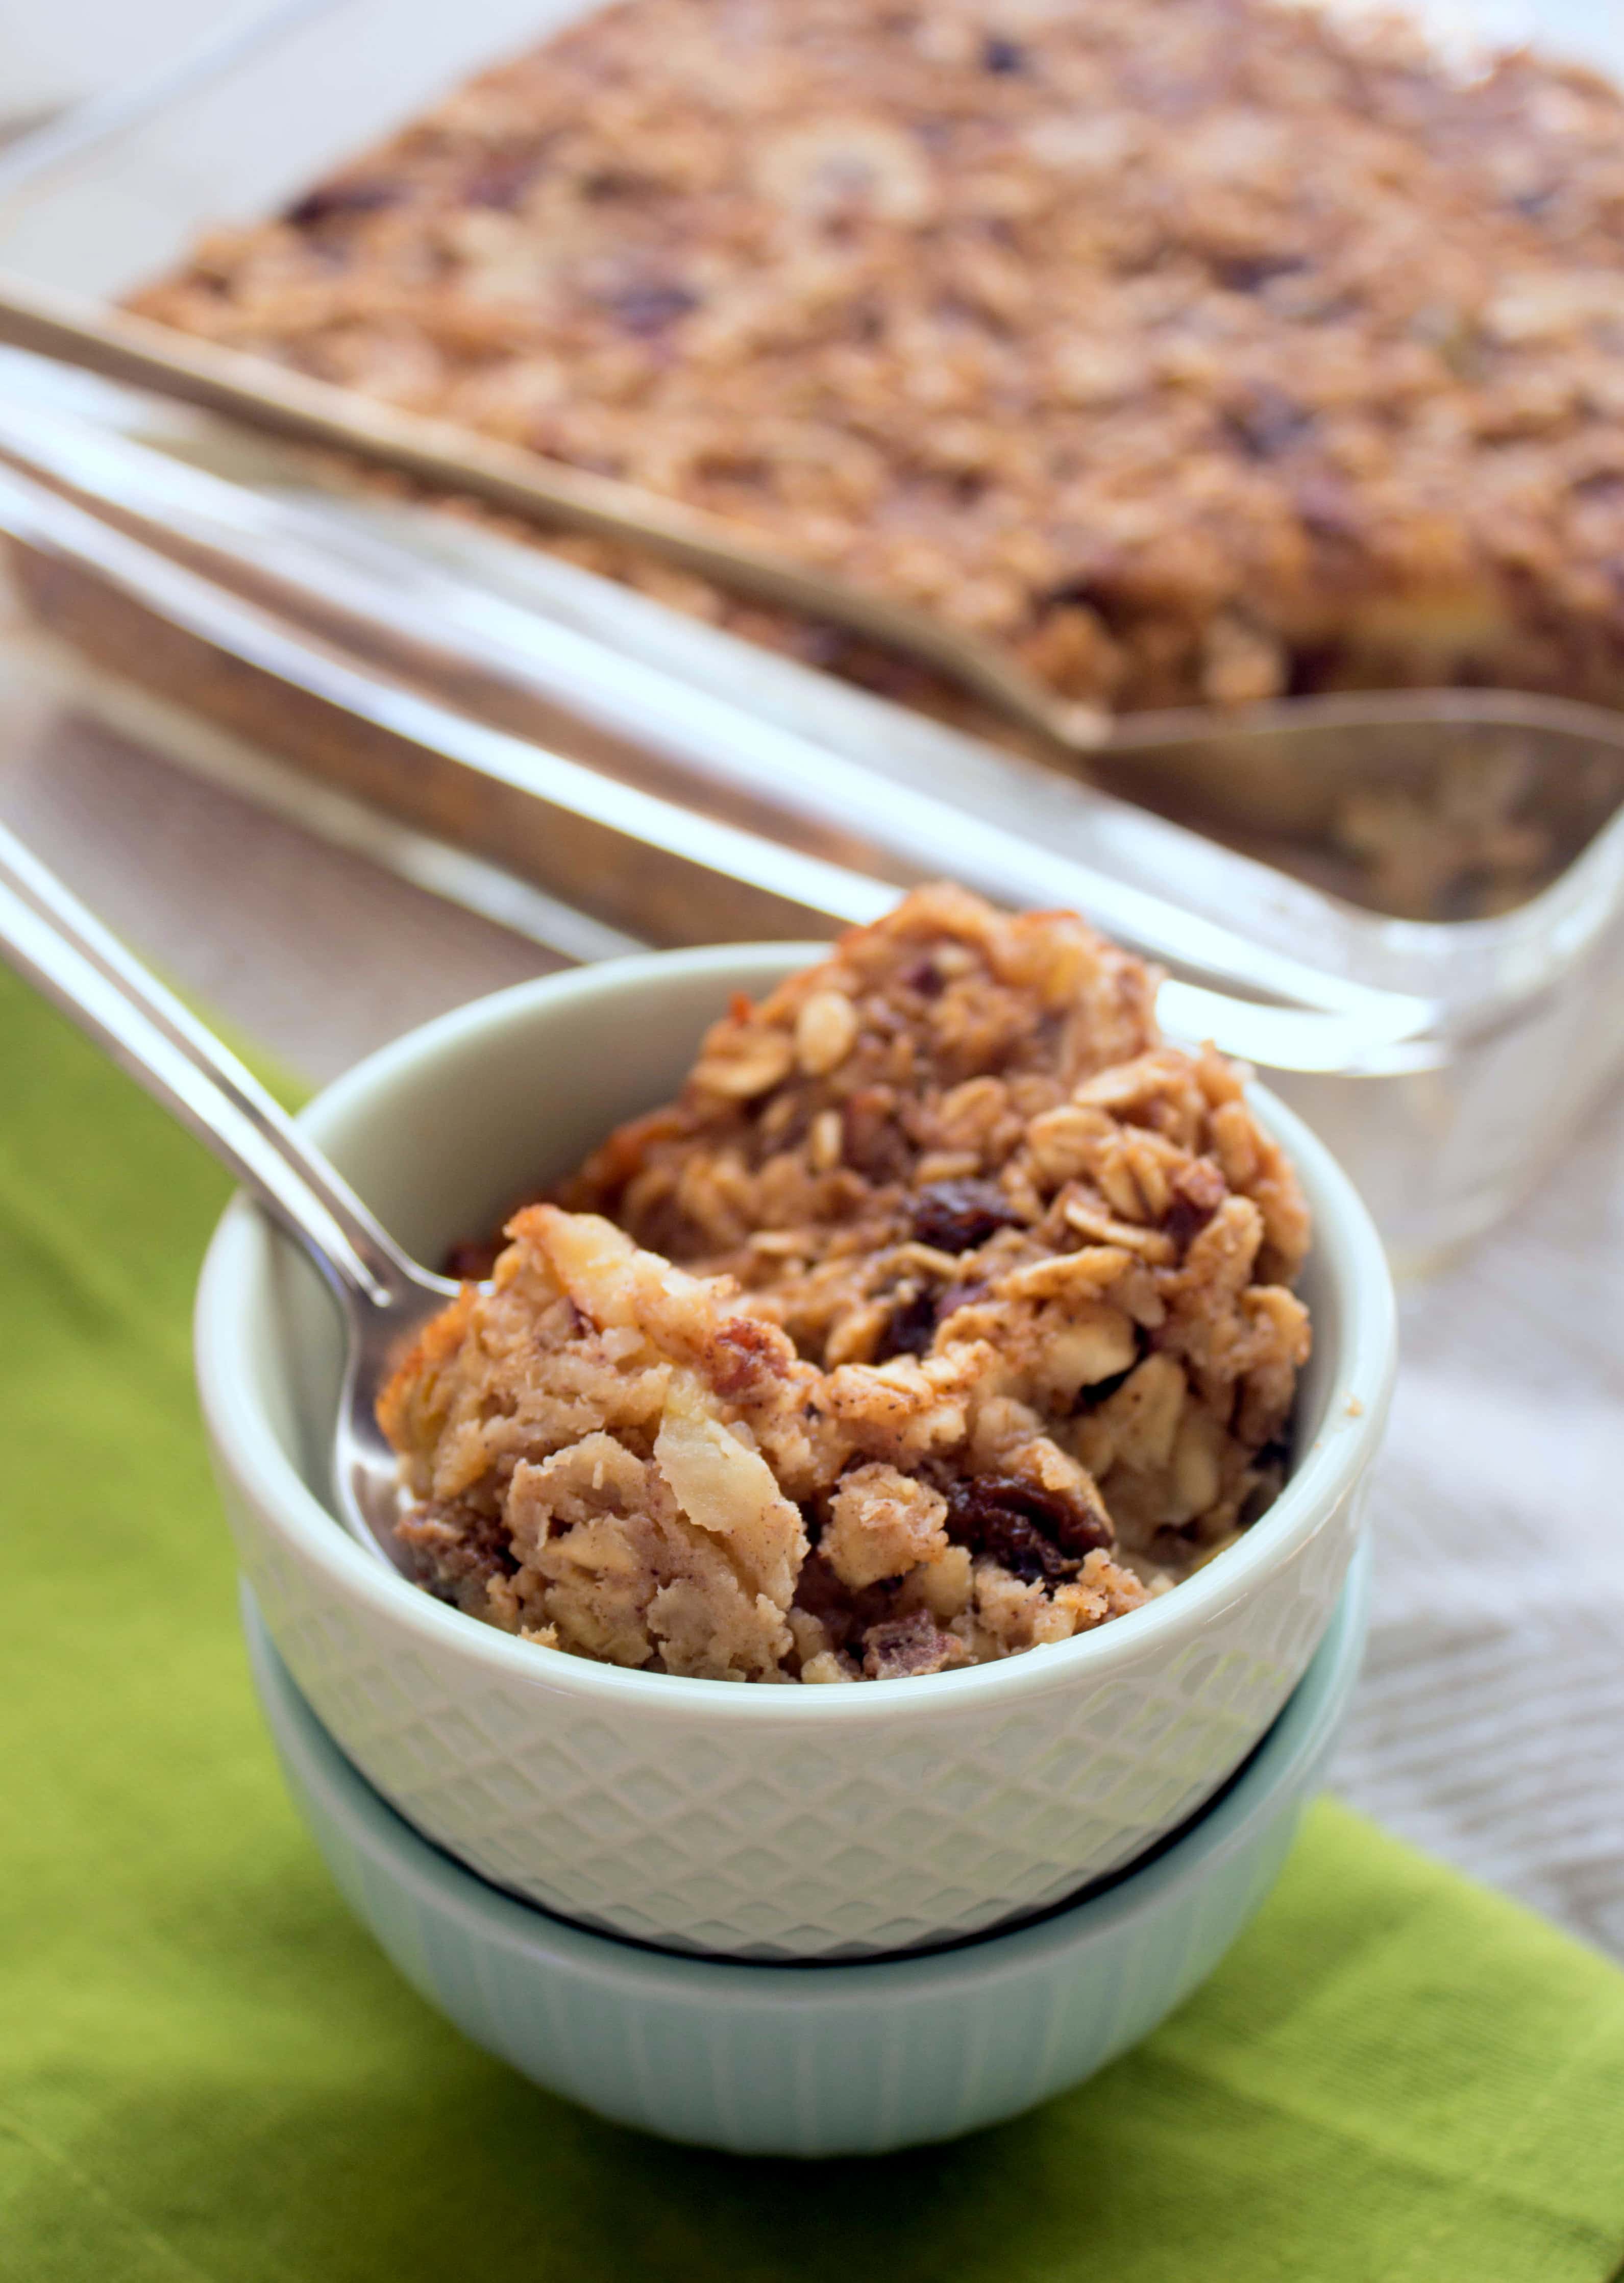 Simple Baked Oatmeal Recipe | Easy and Healthy